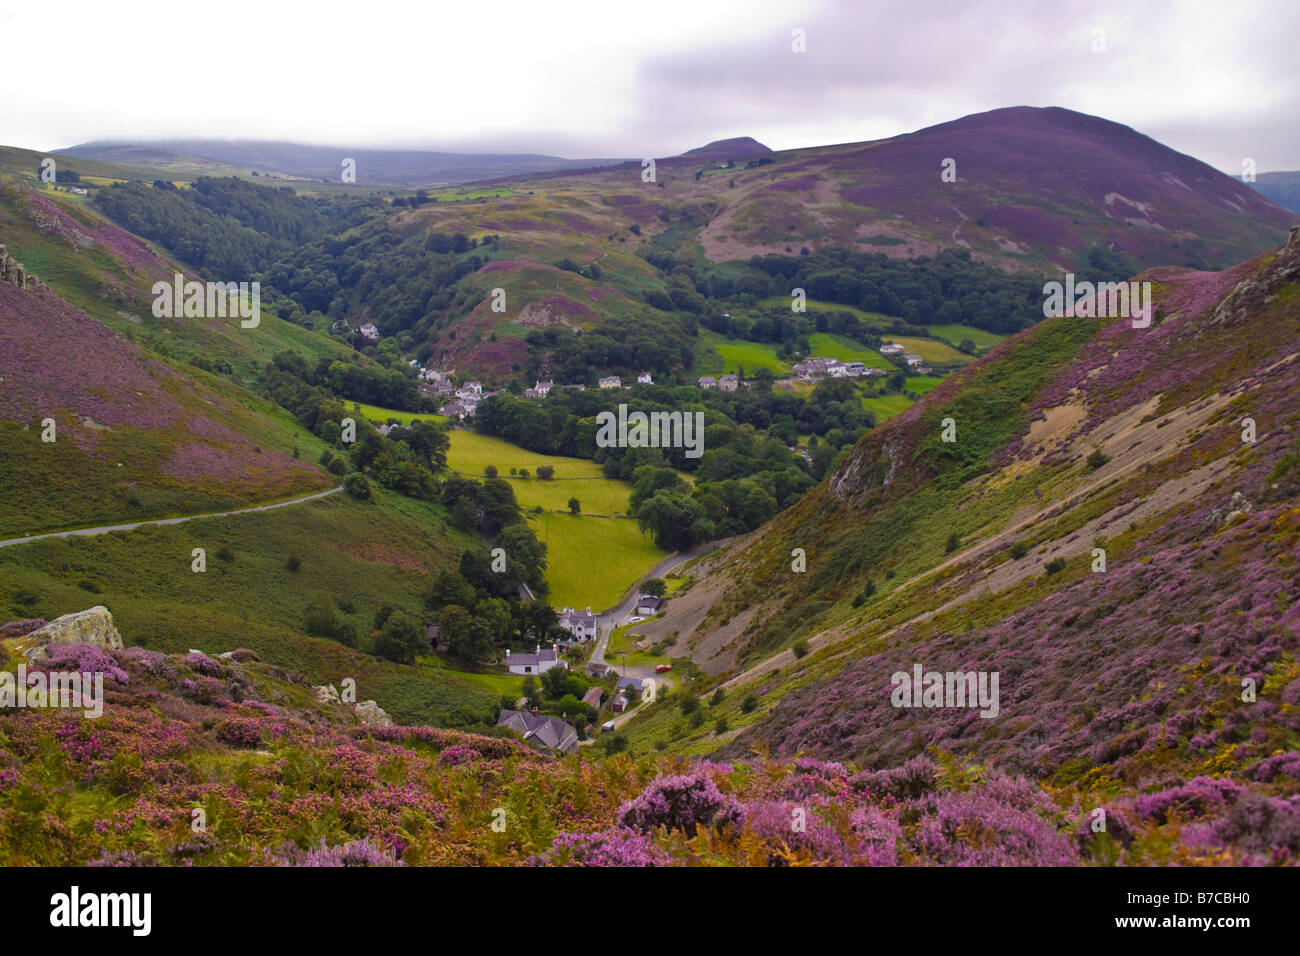 Looking down from the top of Sychnant pass towards Penmaenmawr. Stock Photo